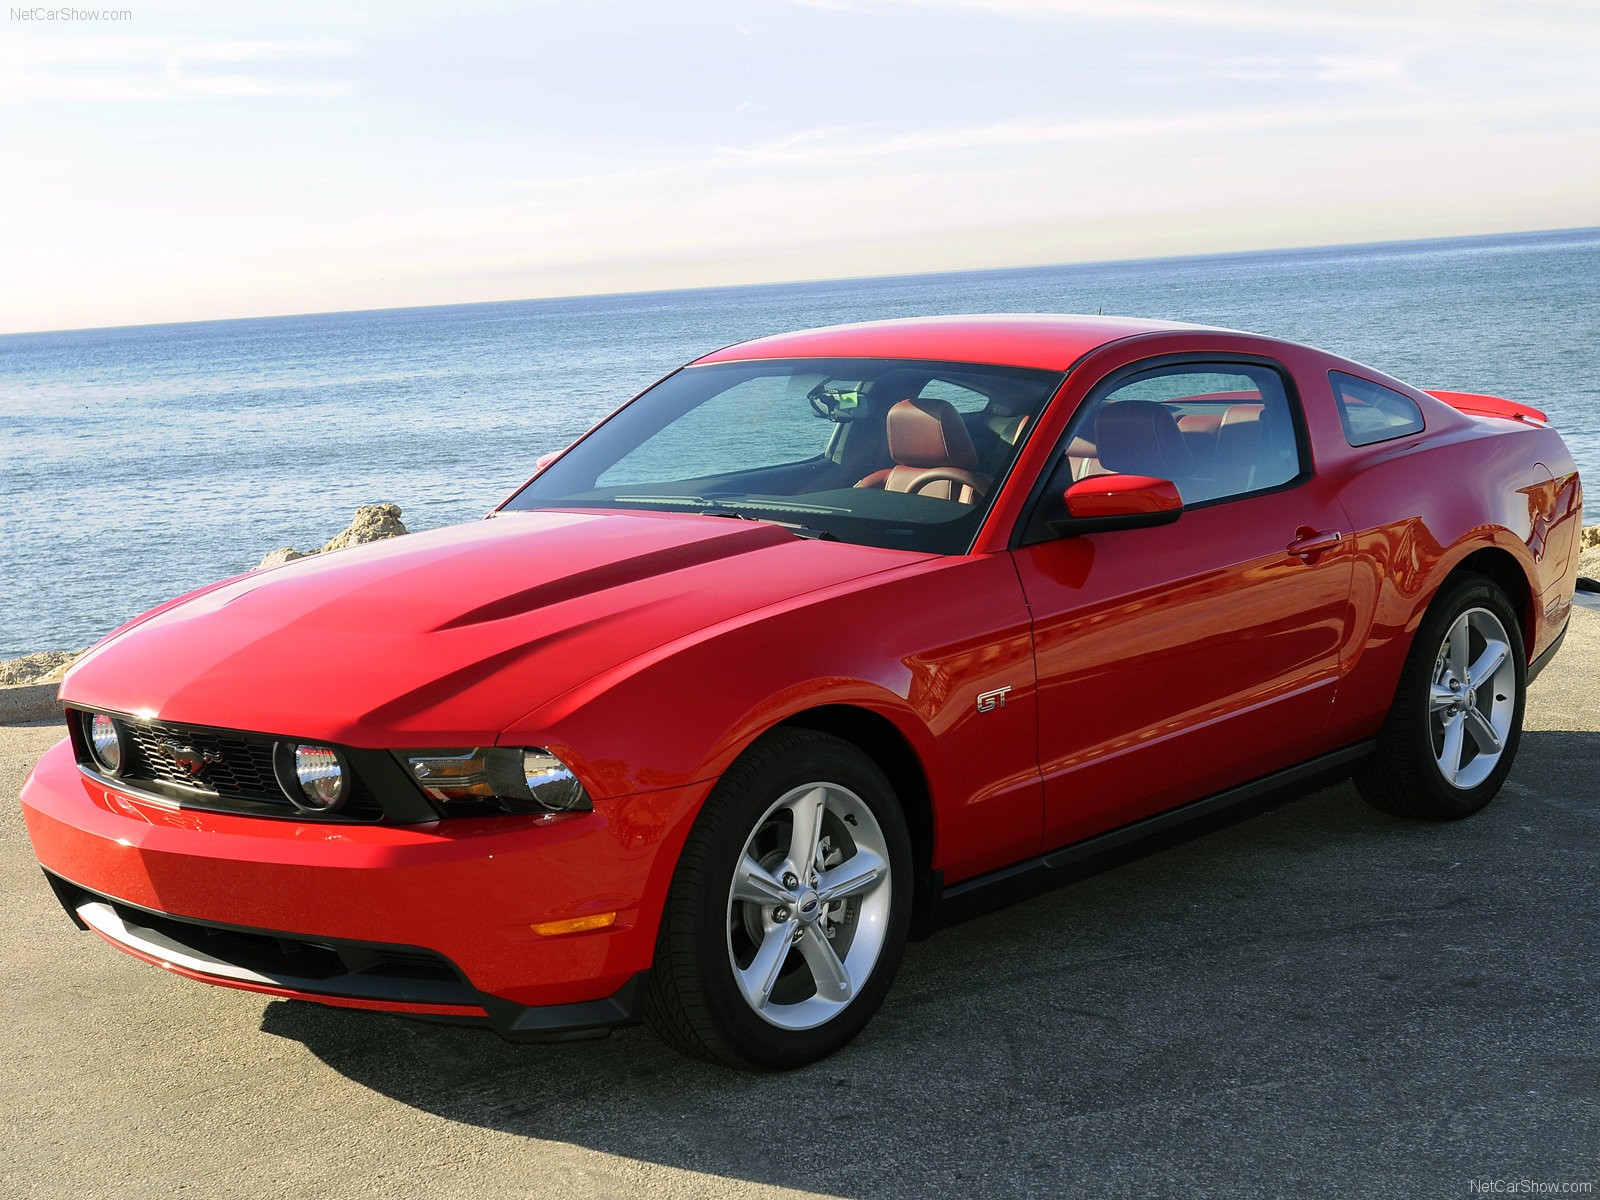 cars, Ride, Vehicles, Ford, Mustang Wallpaper